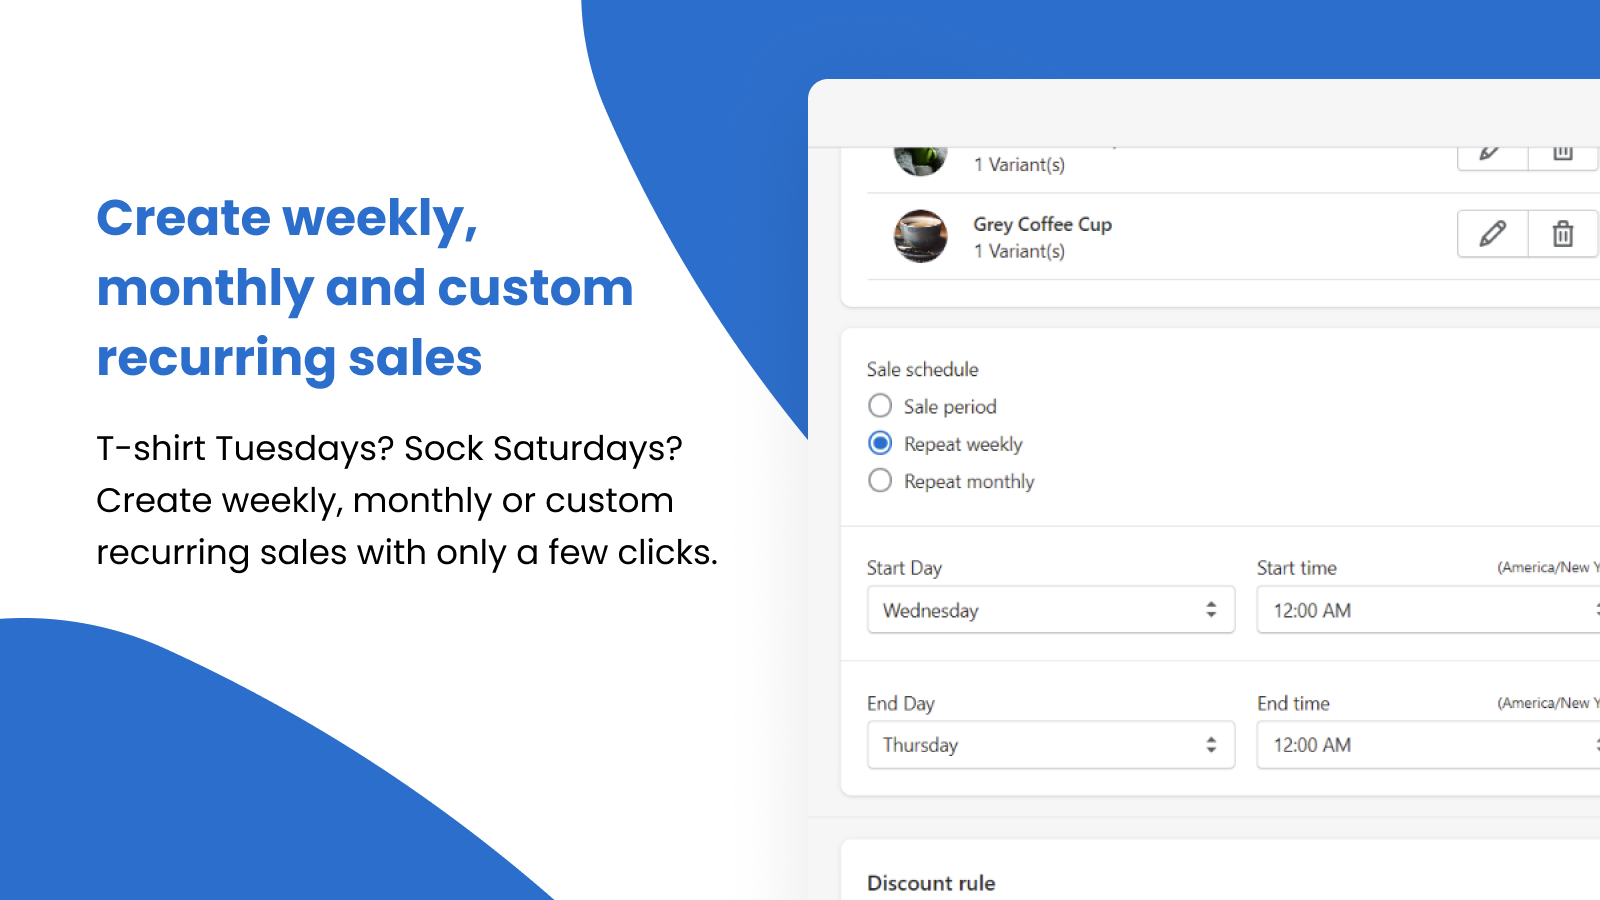 Create weekly, monthly or custom sales with only a few clicks.